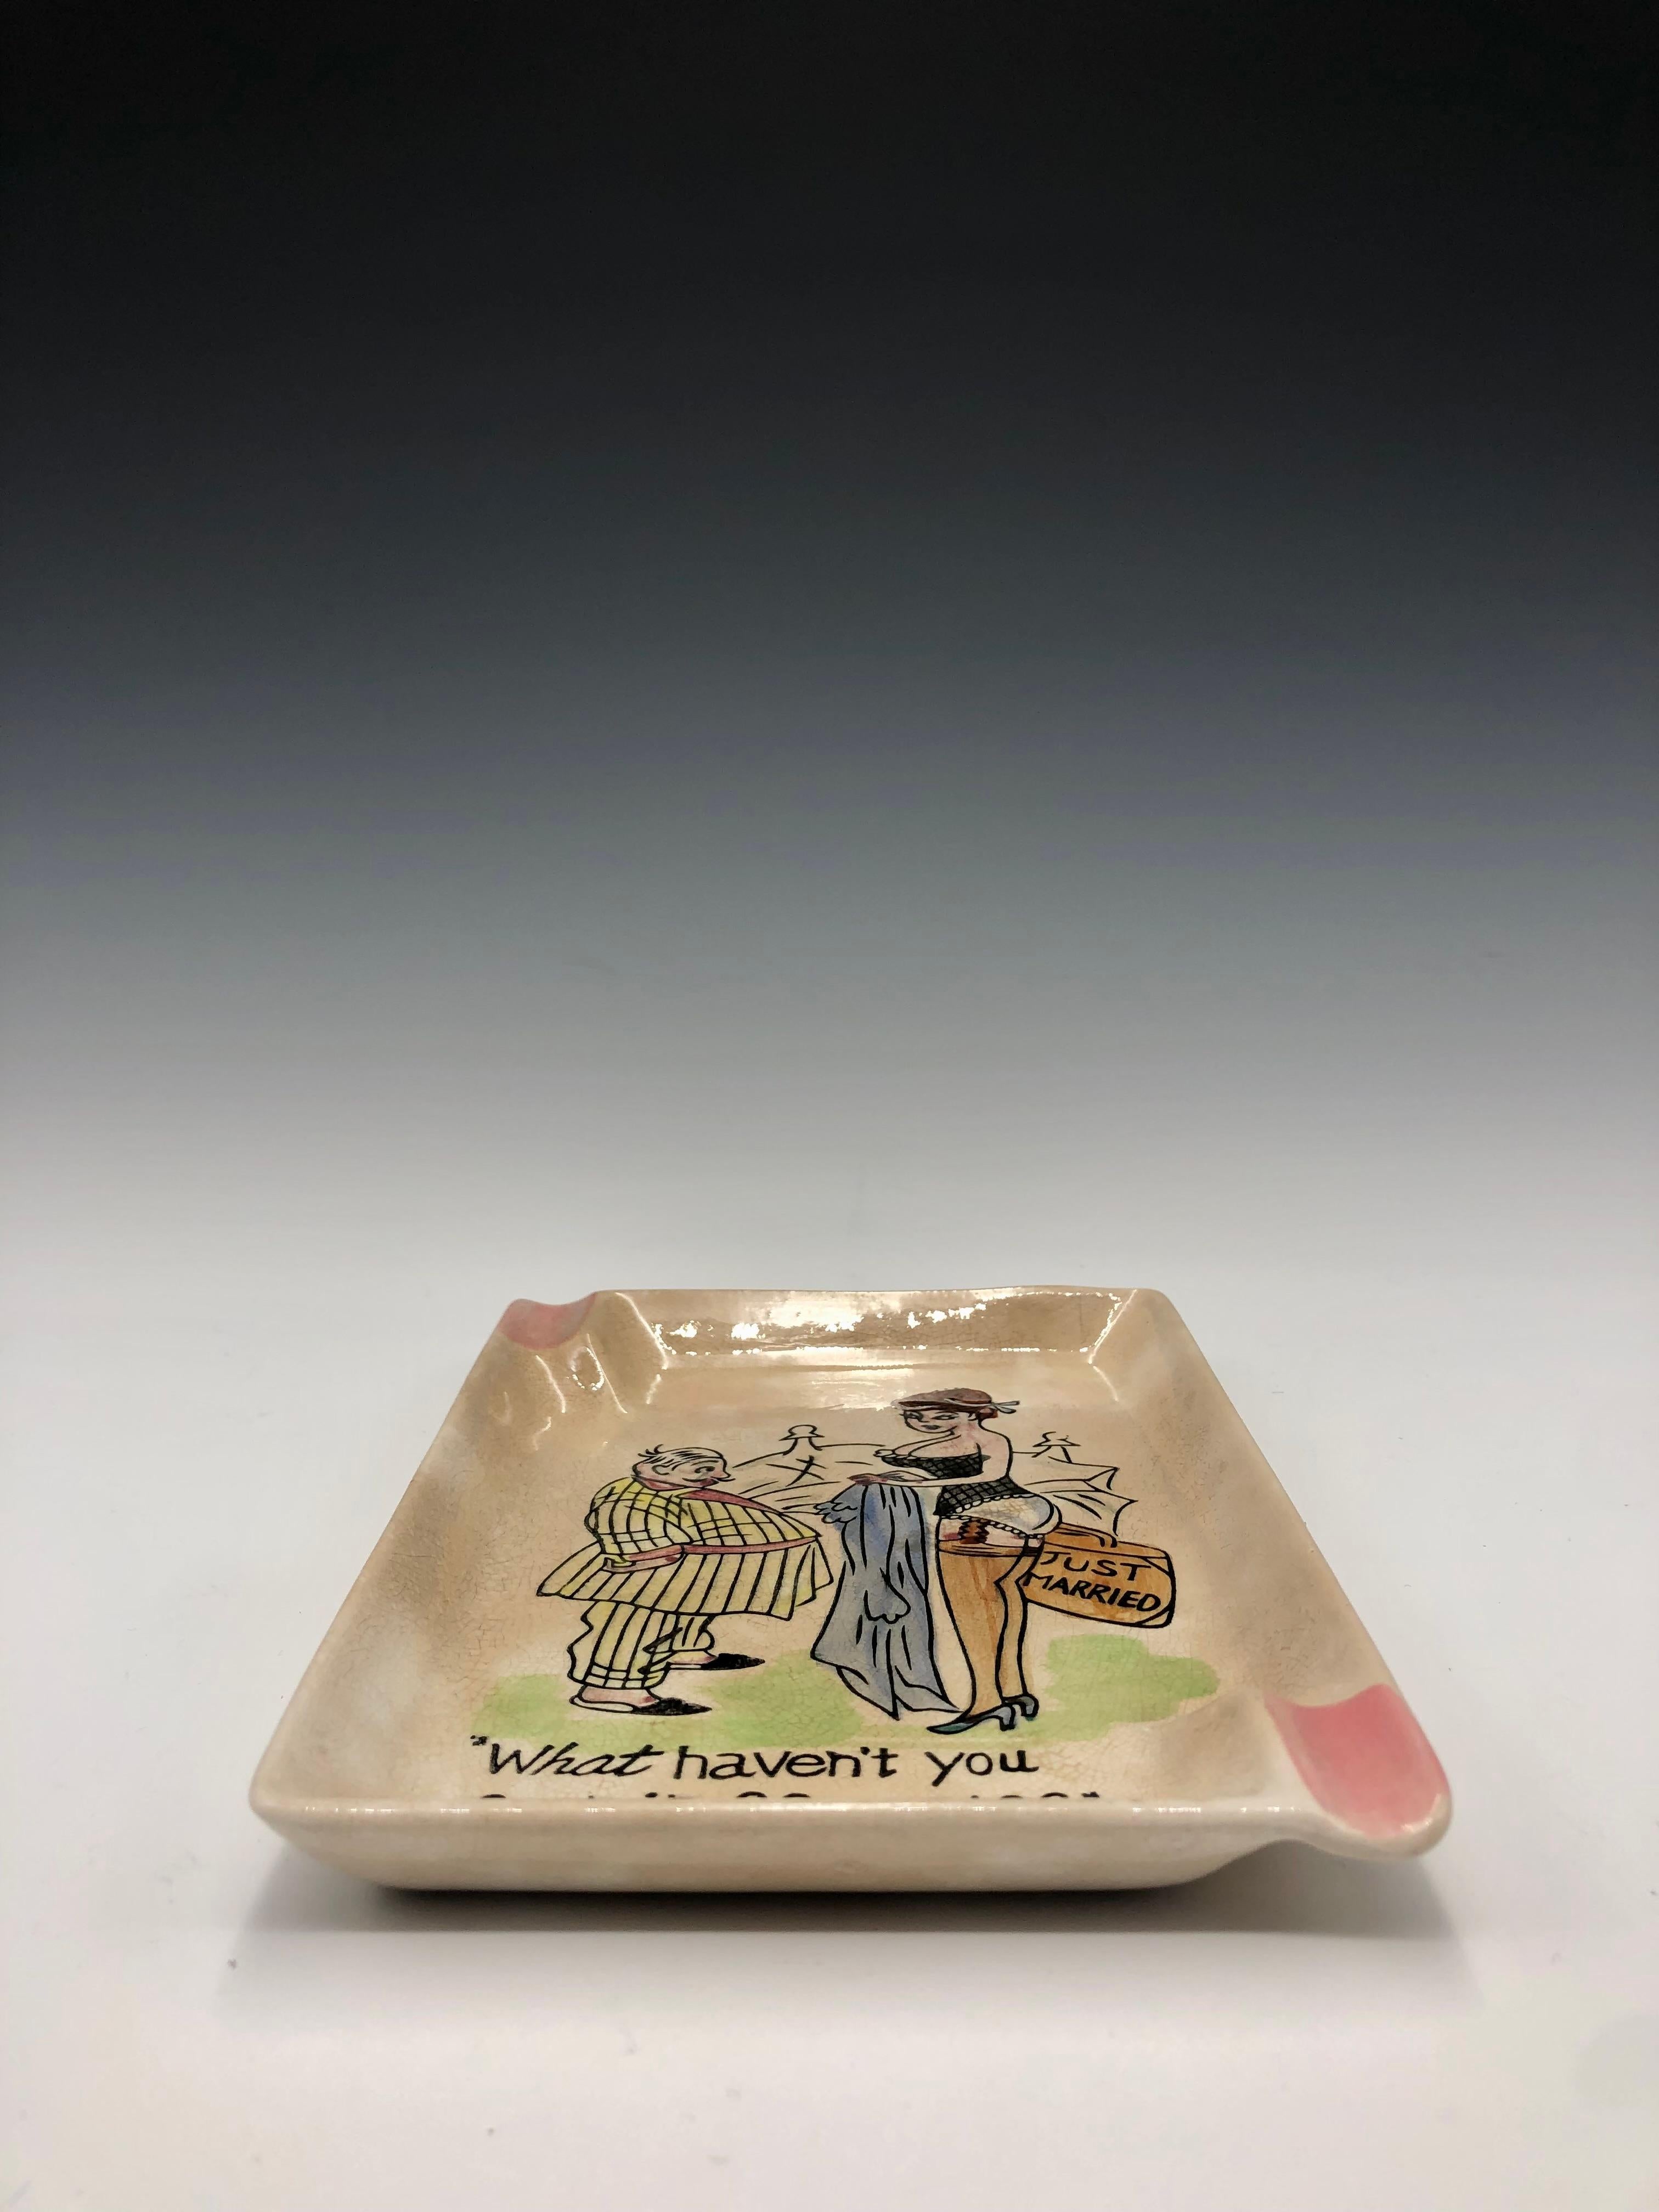 Humorous Vintage Porcelain Ashtray or Catchall In Good Condition For Sale In East Quogue, NY